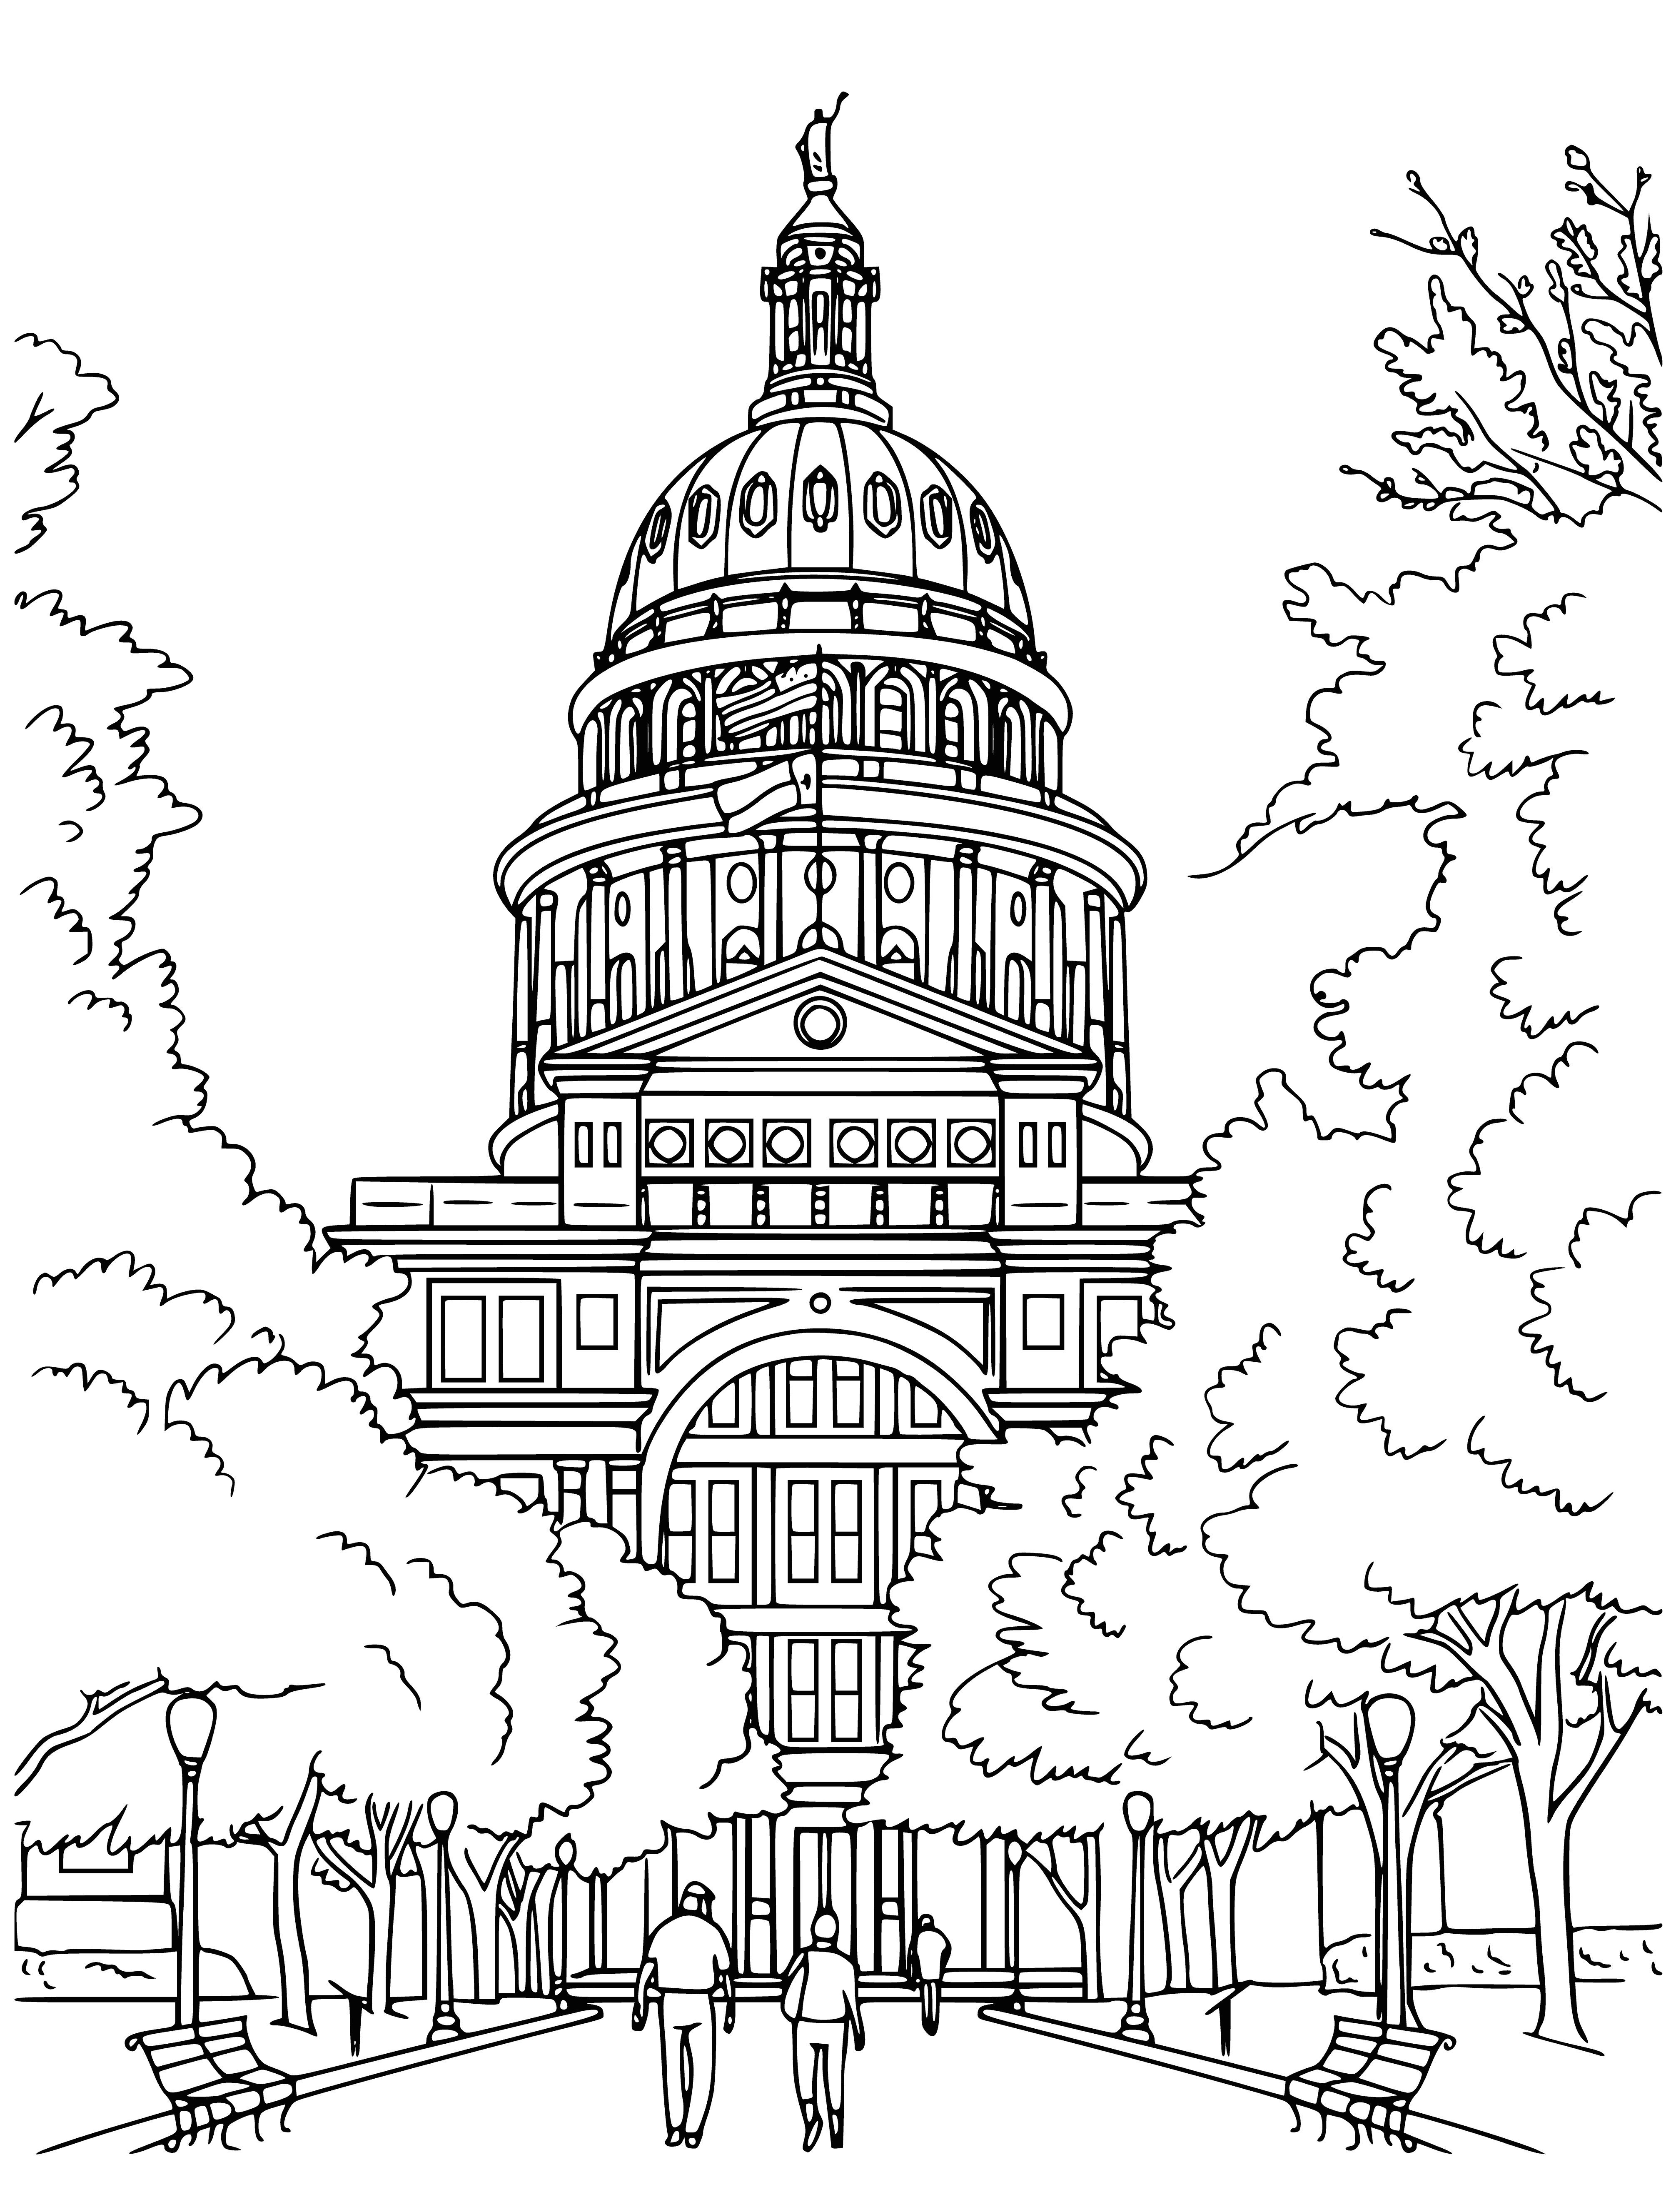 Capitol Building in Washington DC. USA coloring page